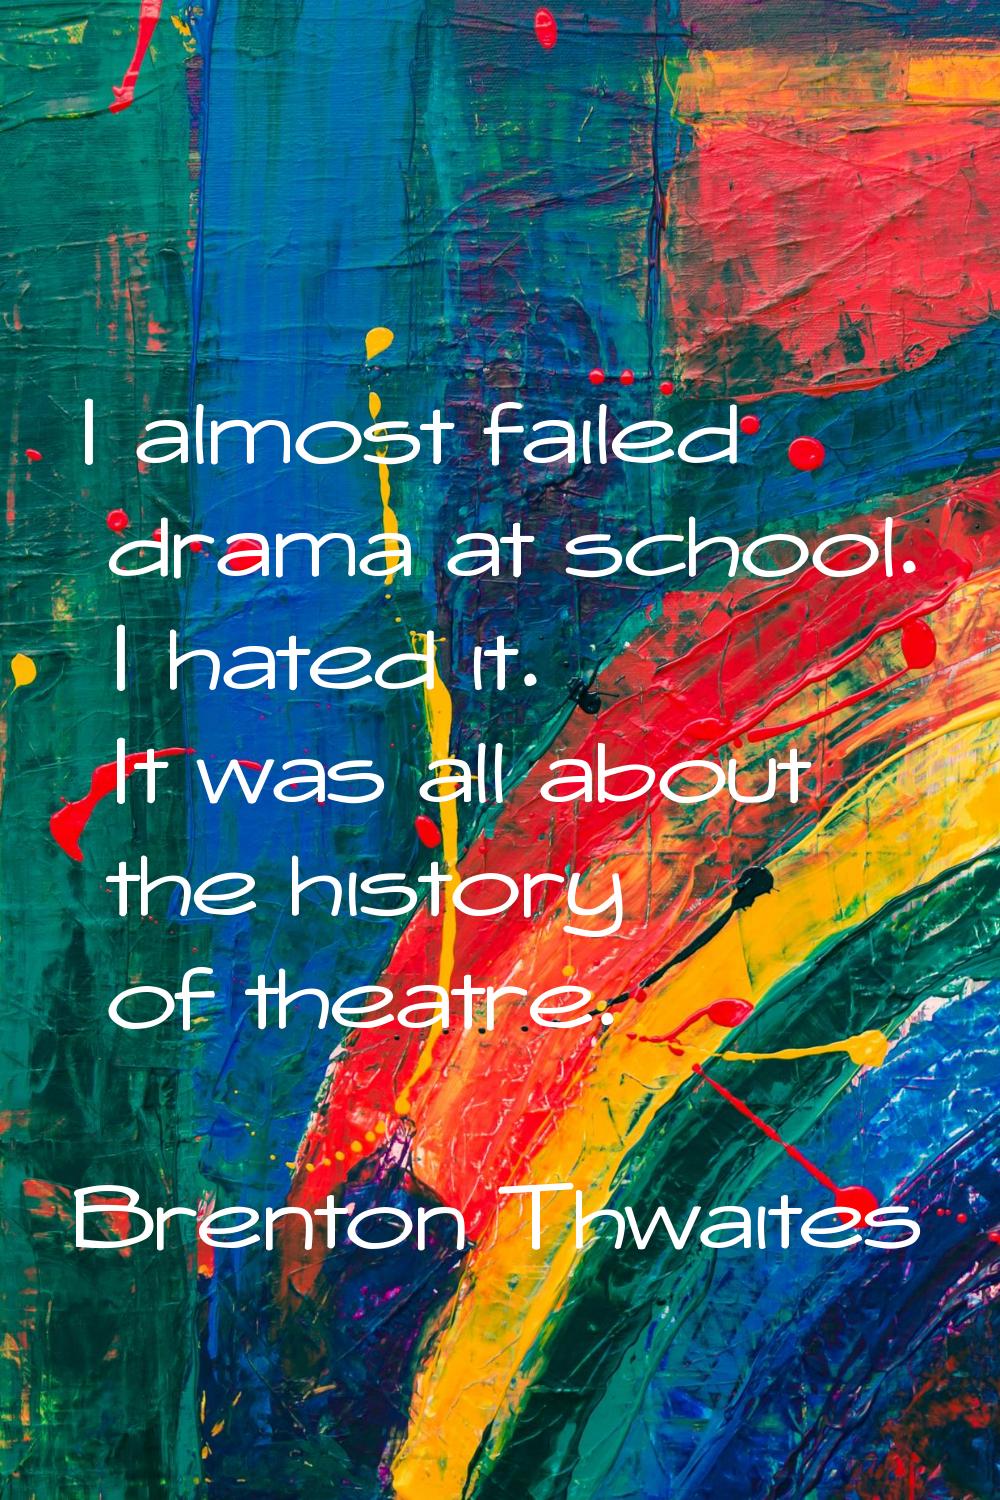 I almost failed drama at school. I hated it. It was all about the history of theatre.